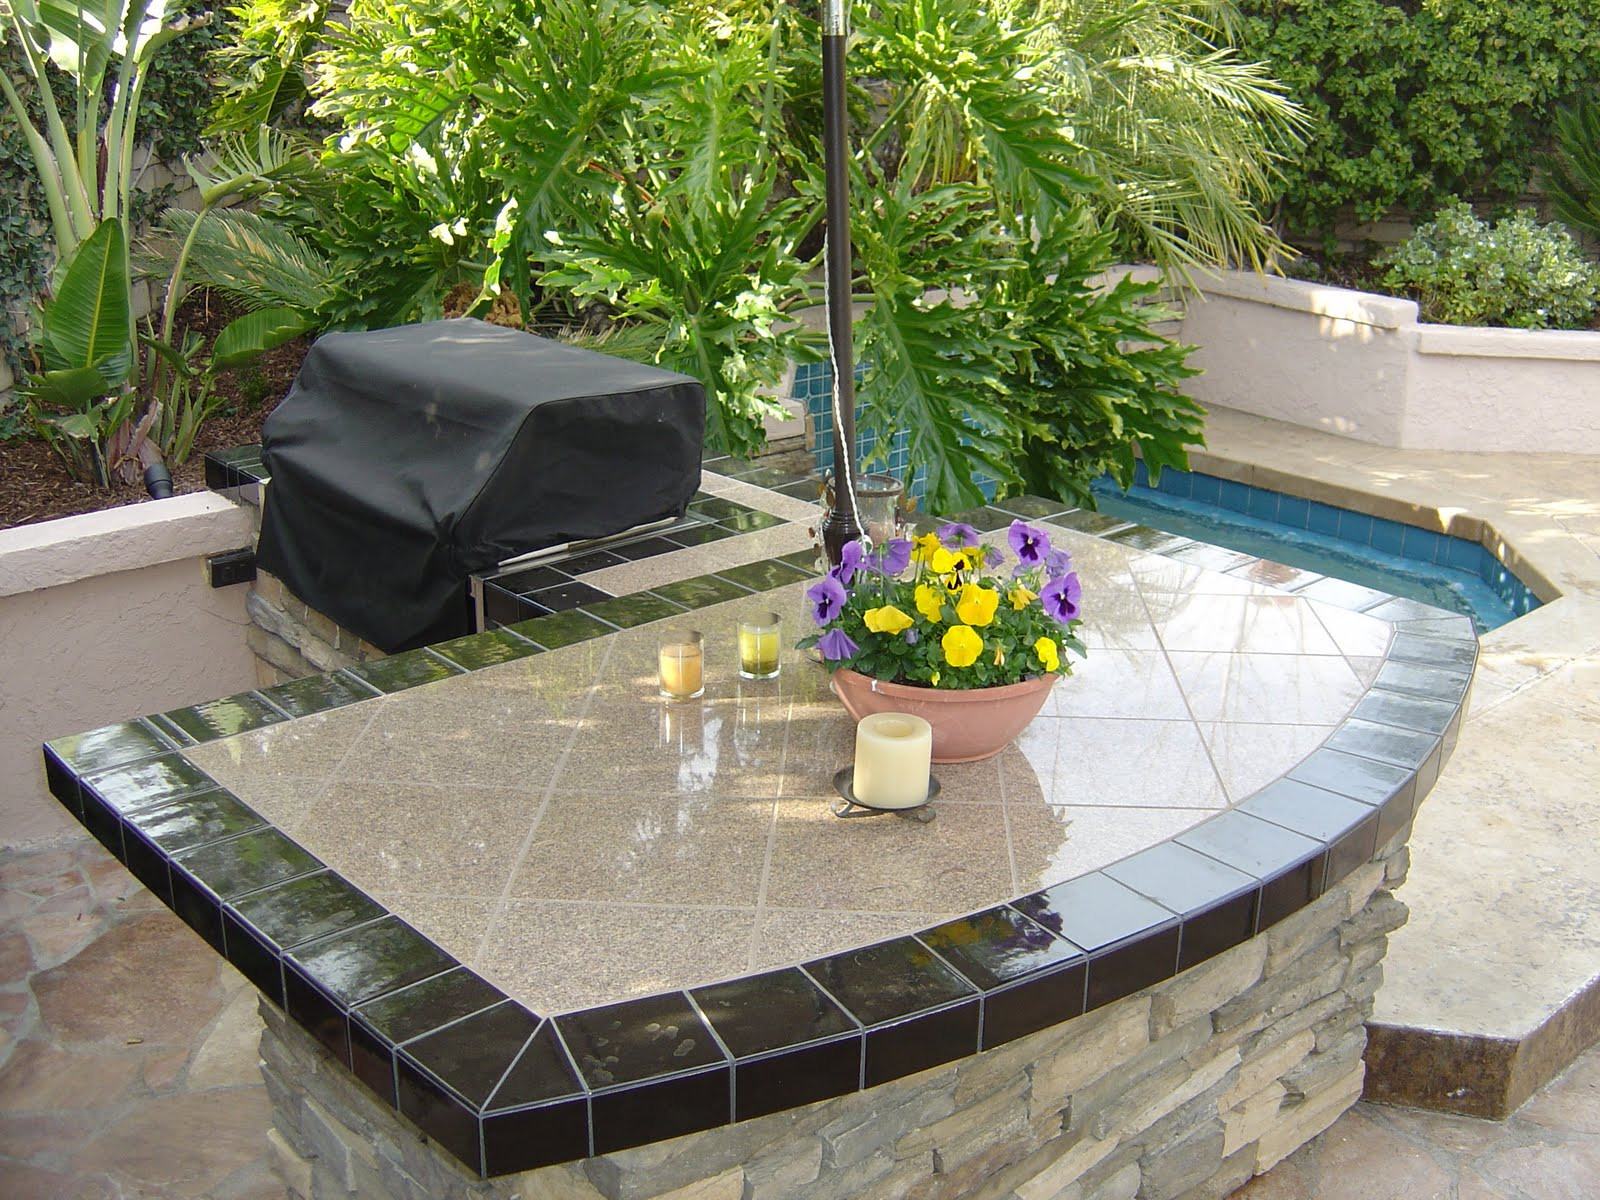 Outdoor Kitchen Tile
 Outdoor Kitchen Construction Tiles tiles and more tiles